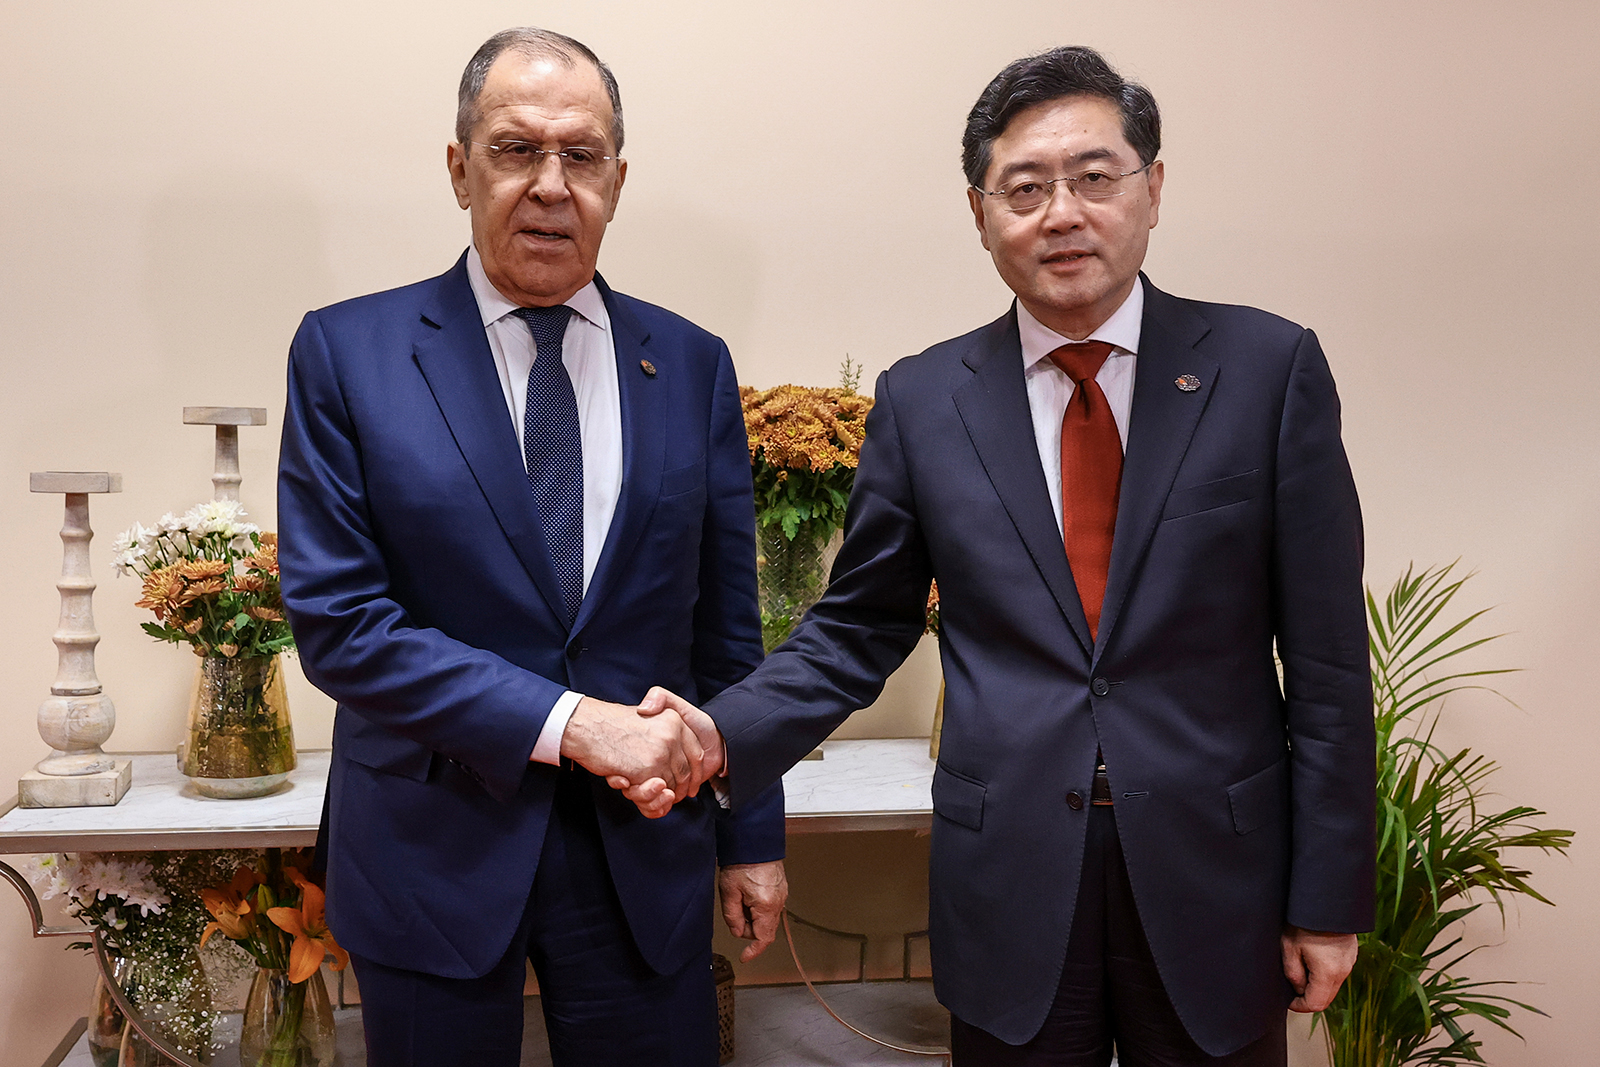 Russian Foreign Minister Sergey Lavrov, left, and Chinese Foreign Minister Qin Gang pose for photo on the sideline of G20 foreign minister's meeting in New Delhi, India, on Thursday, March 2.